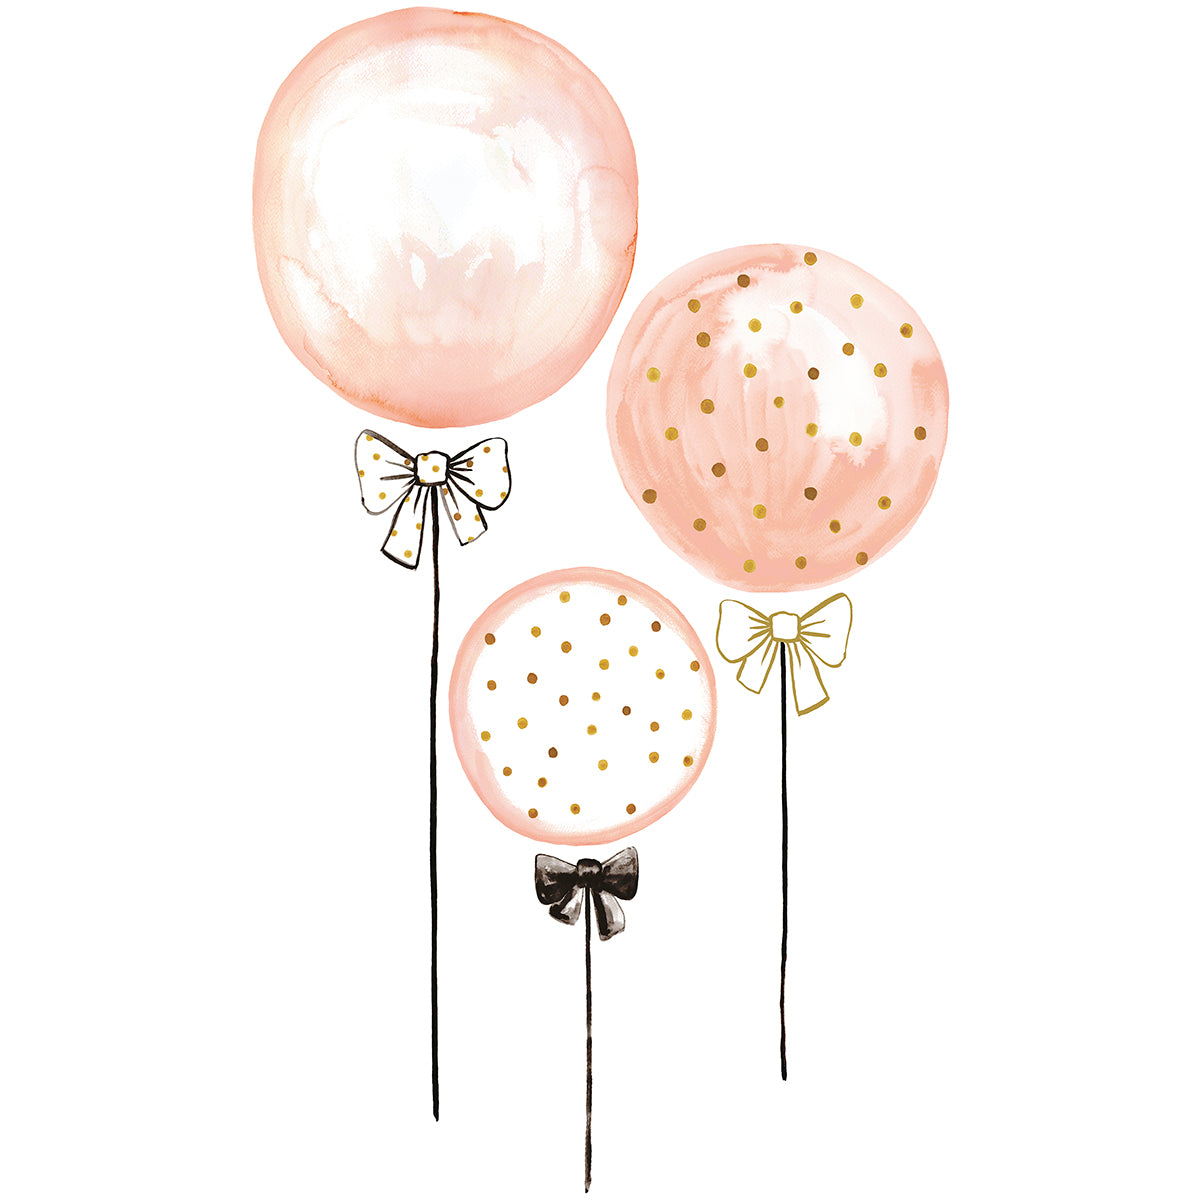 Lilipinso Wall Decals Special Size - Pink Balloons With Gold Rounds Wall decal